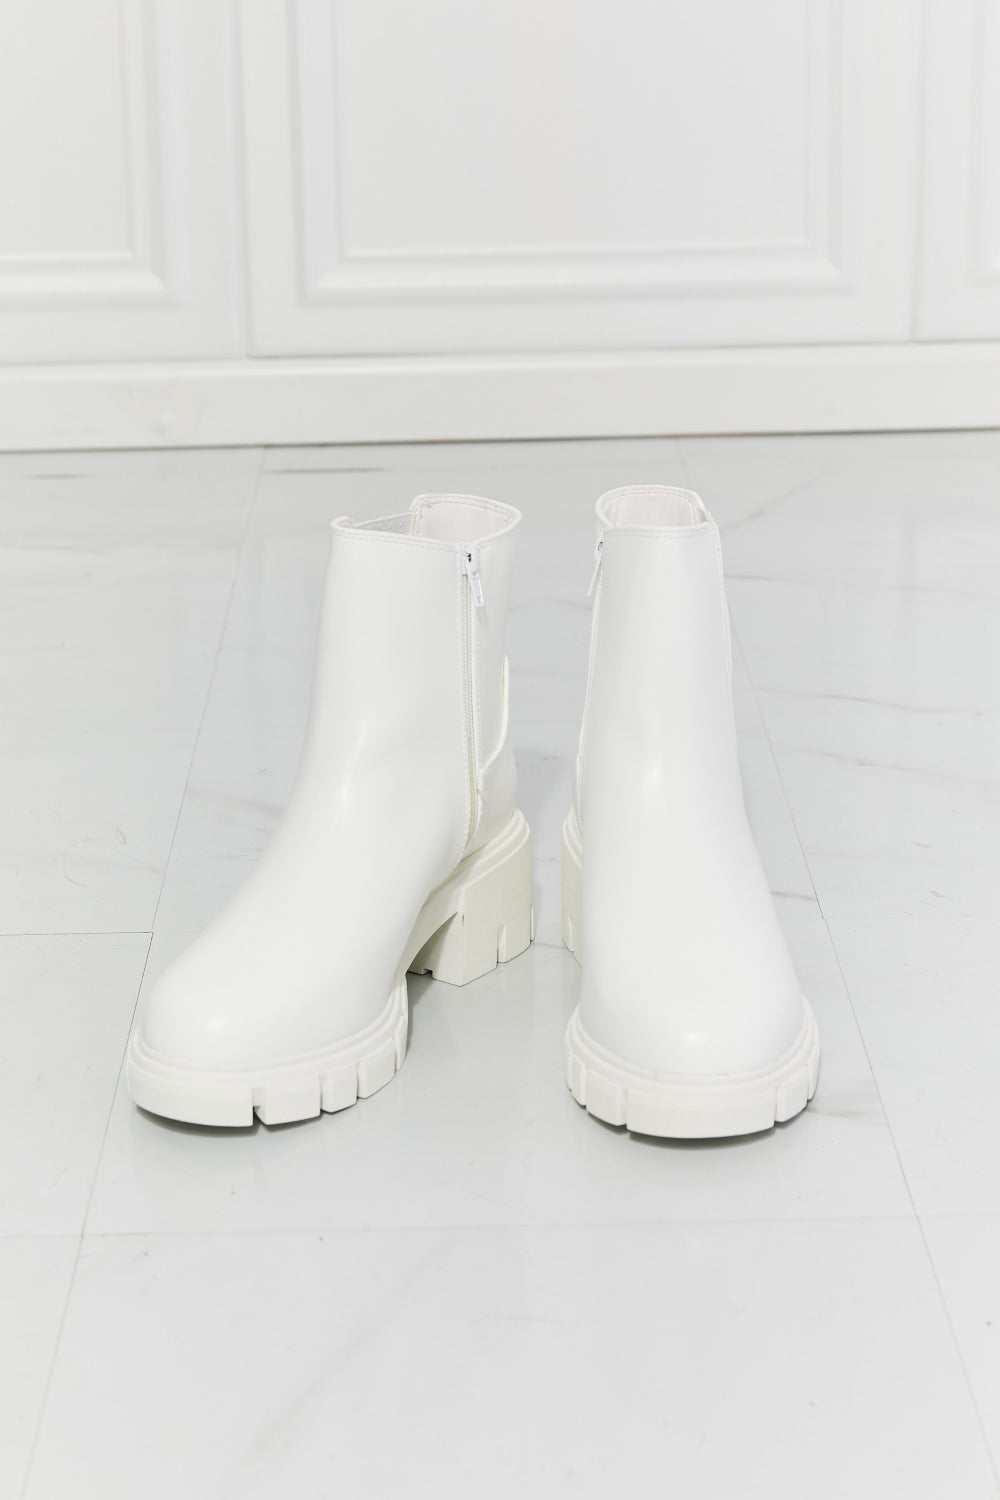 MMShoes What It Takes Lug Sole Chelsea Boots in White Print on any thing USA/STOD clothes